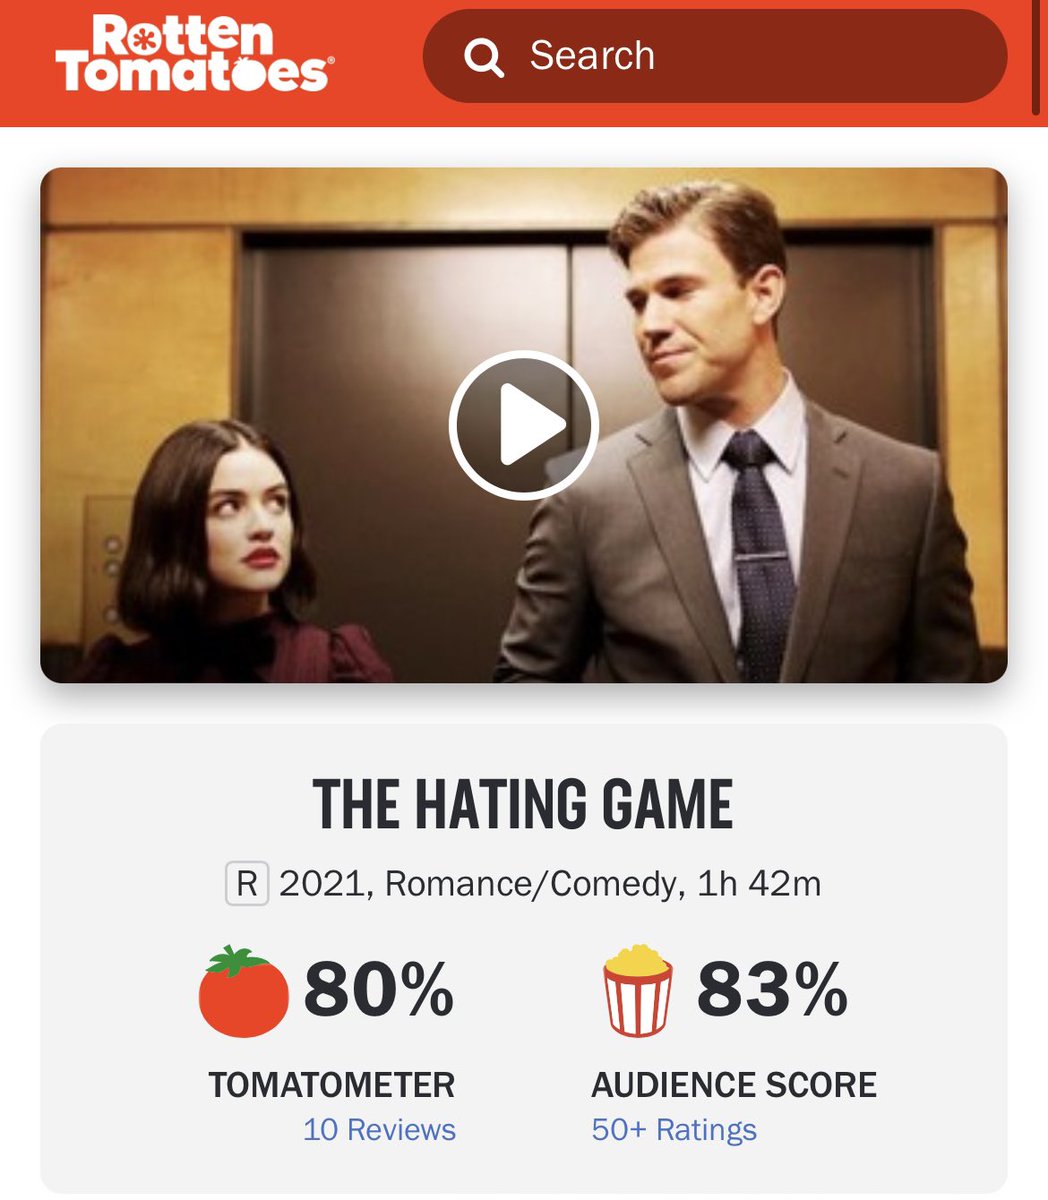 The Rotten Tomatoes score for #TheHatingGame starring Lucy Hale and Austin Stowell has increased to 80%.